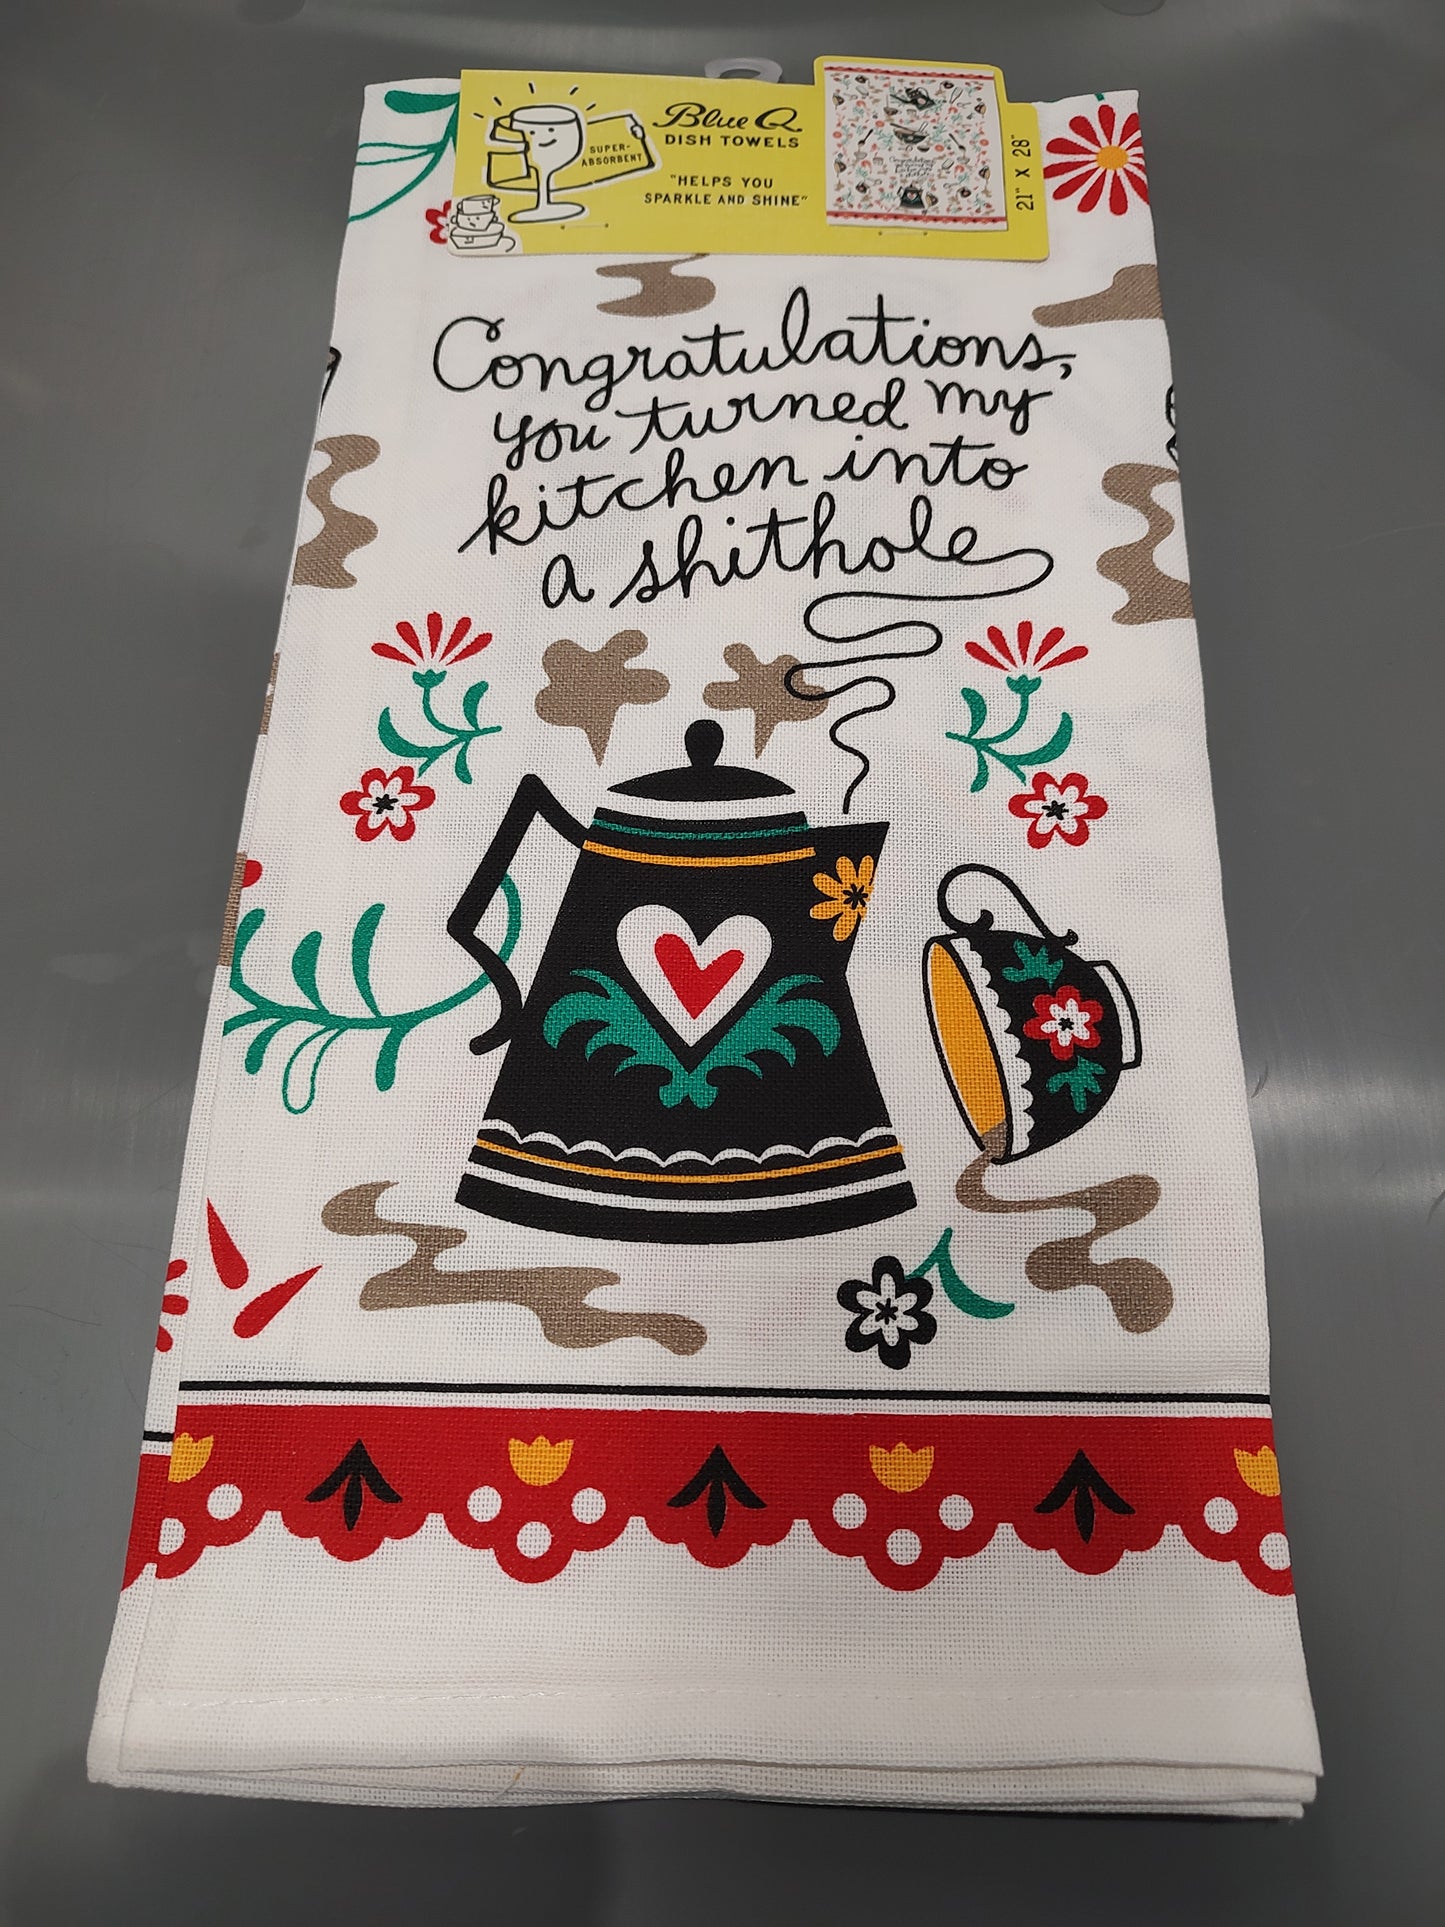 Congratulations, you turned my kitchen into a shithole - Dish Towel